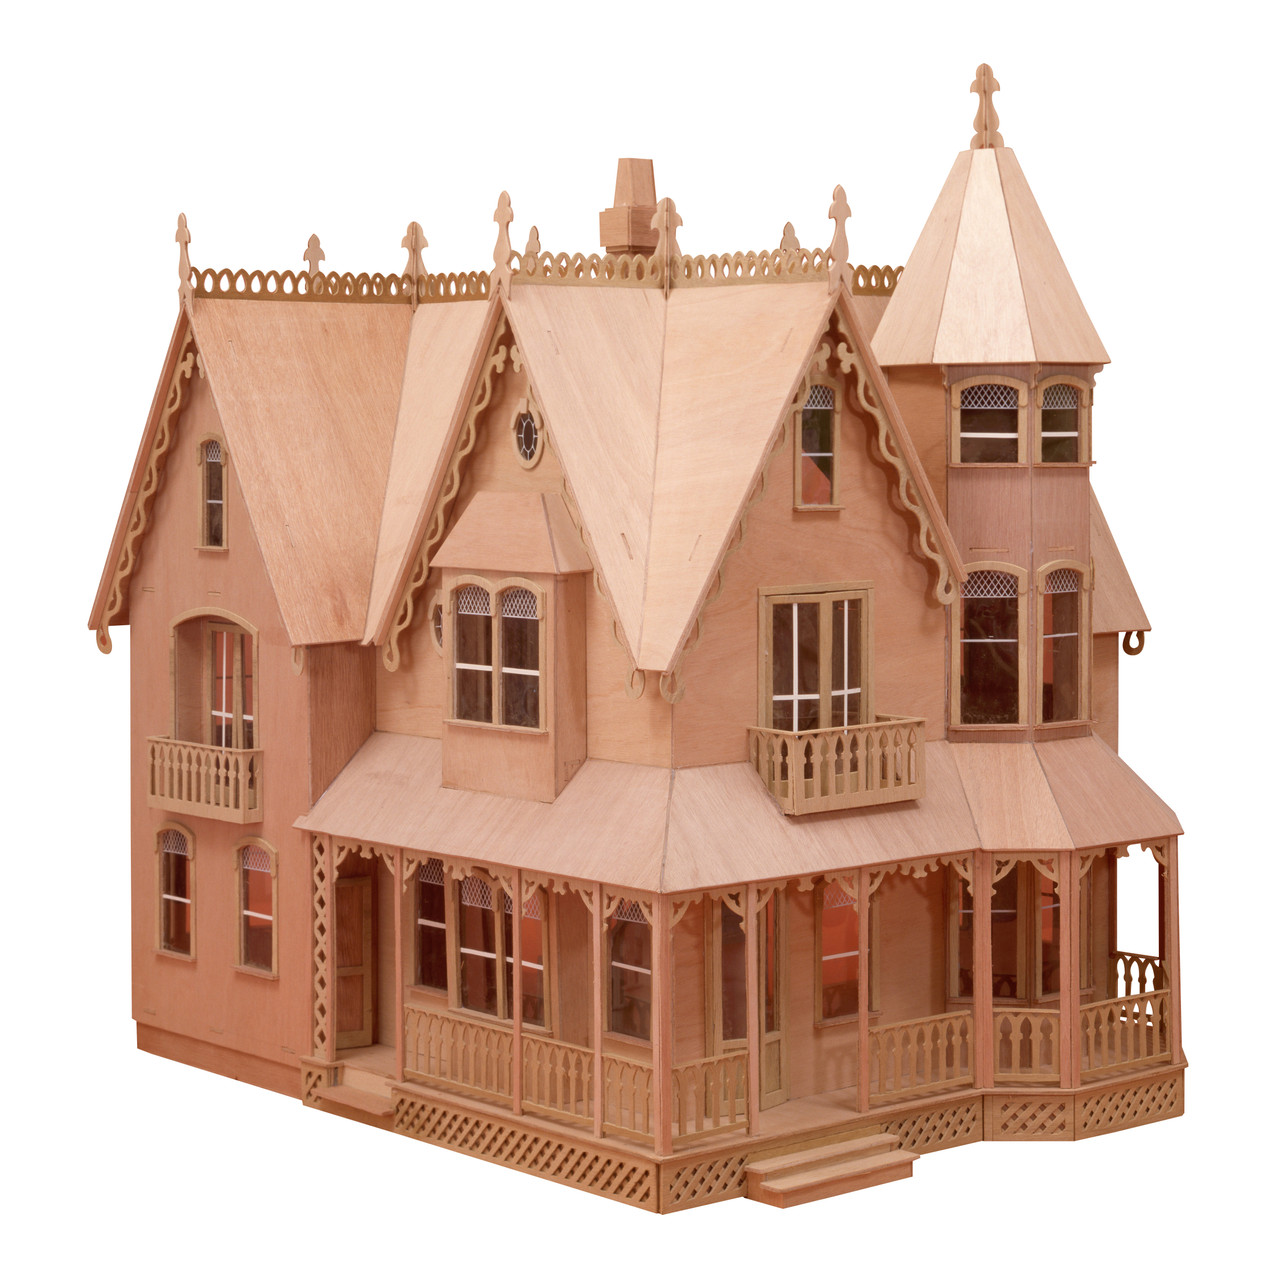 Completed, Finished and ON SALE NOW  Doll house plans, Doll house,  Miniature houses